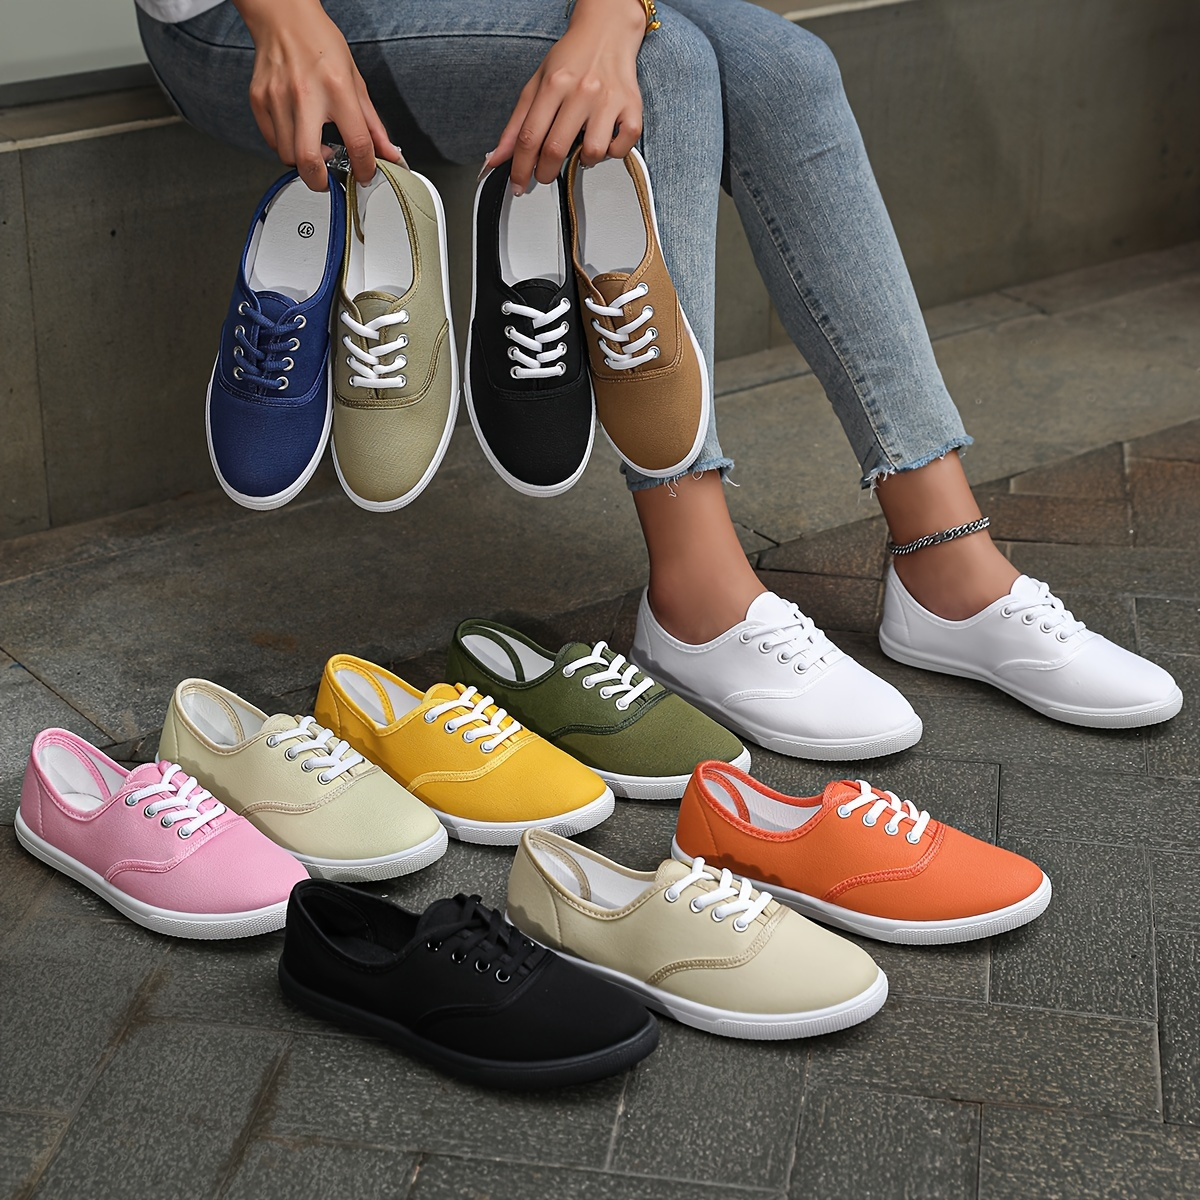 

Women's Solid Color Canvas Sneakers, Simple Style Lace Up Flat Walking Shoes, Casual Lightweight Student Shoes Koningsdag/king's Day